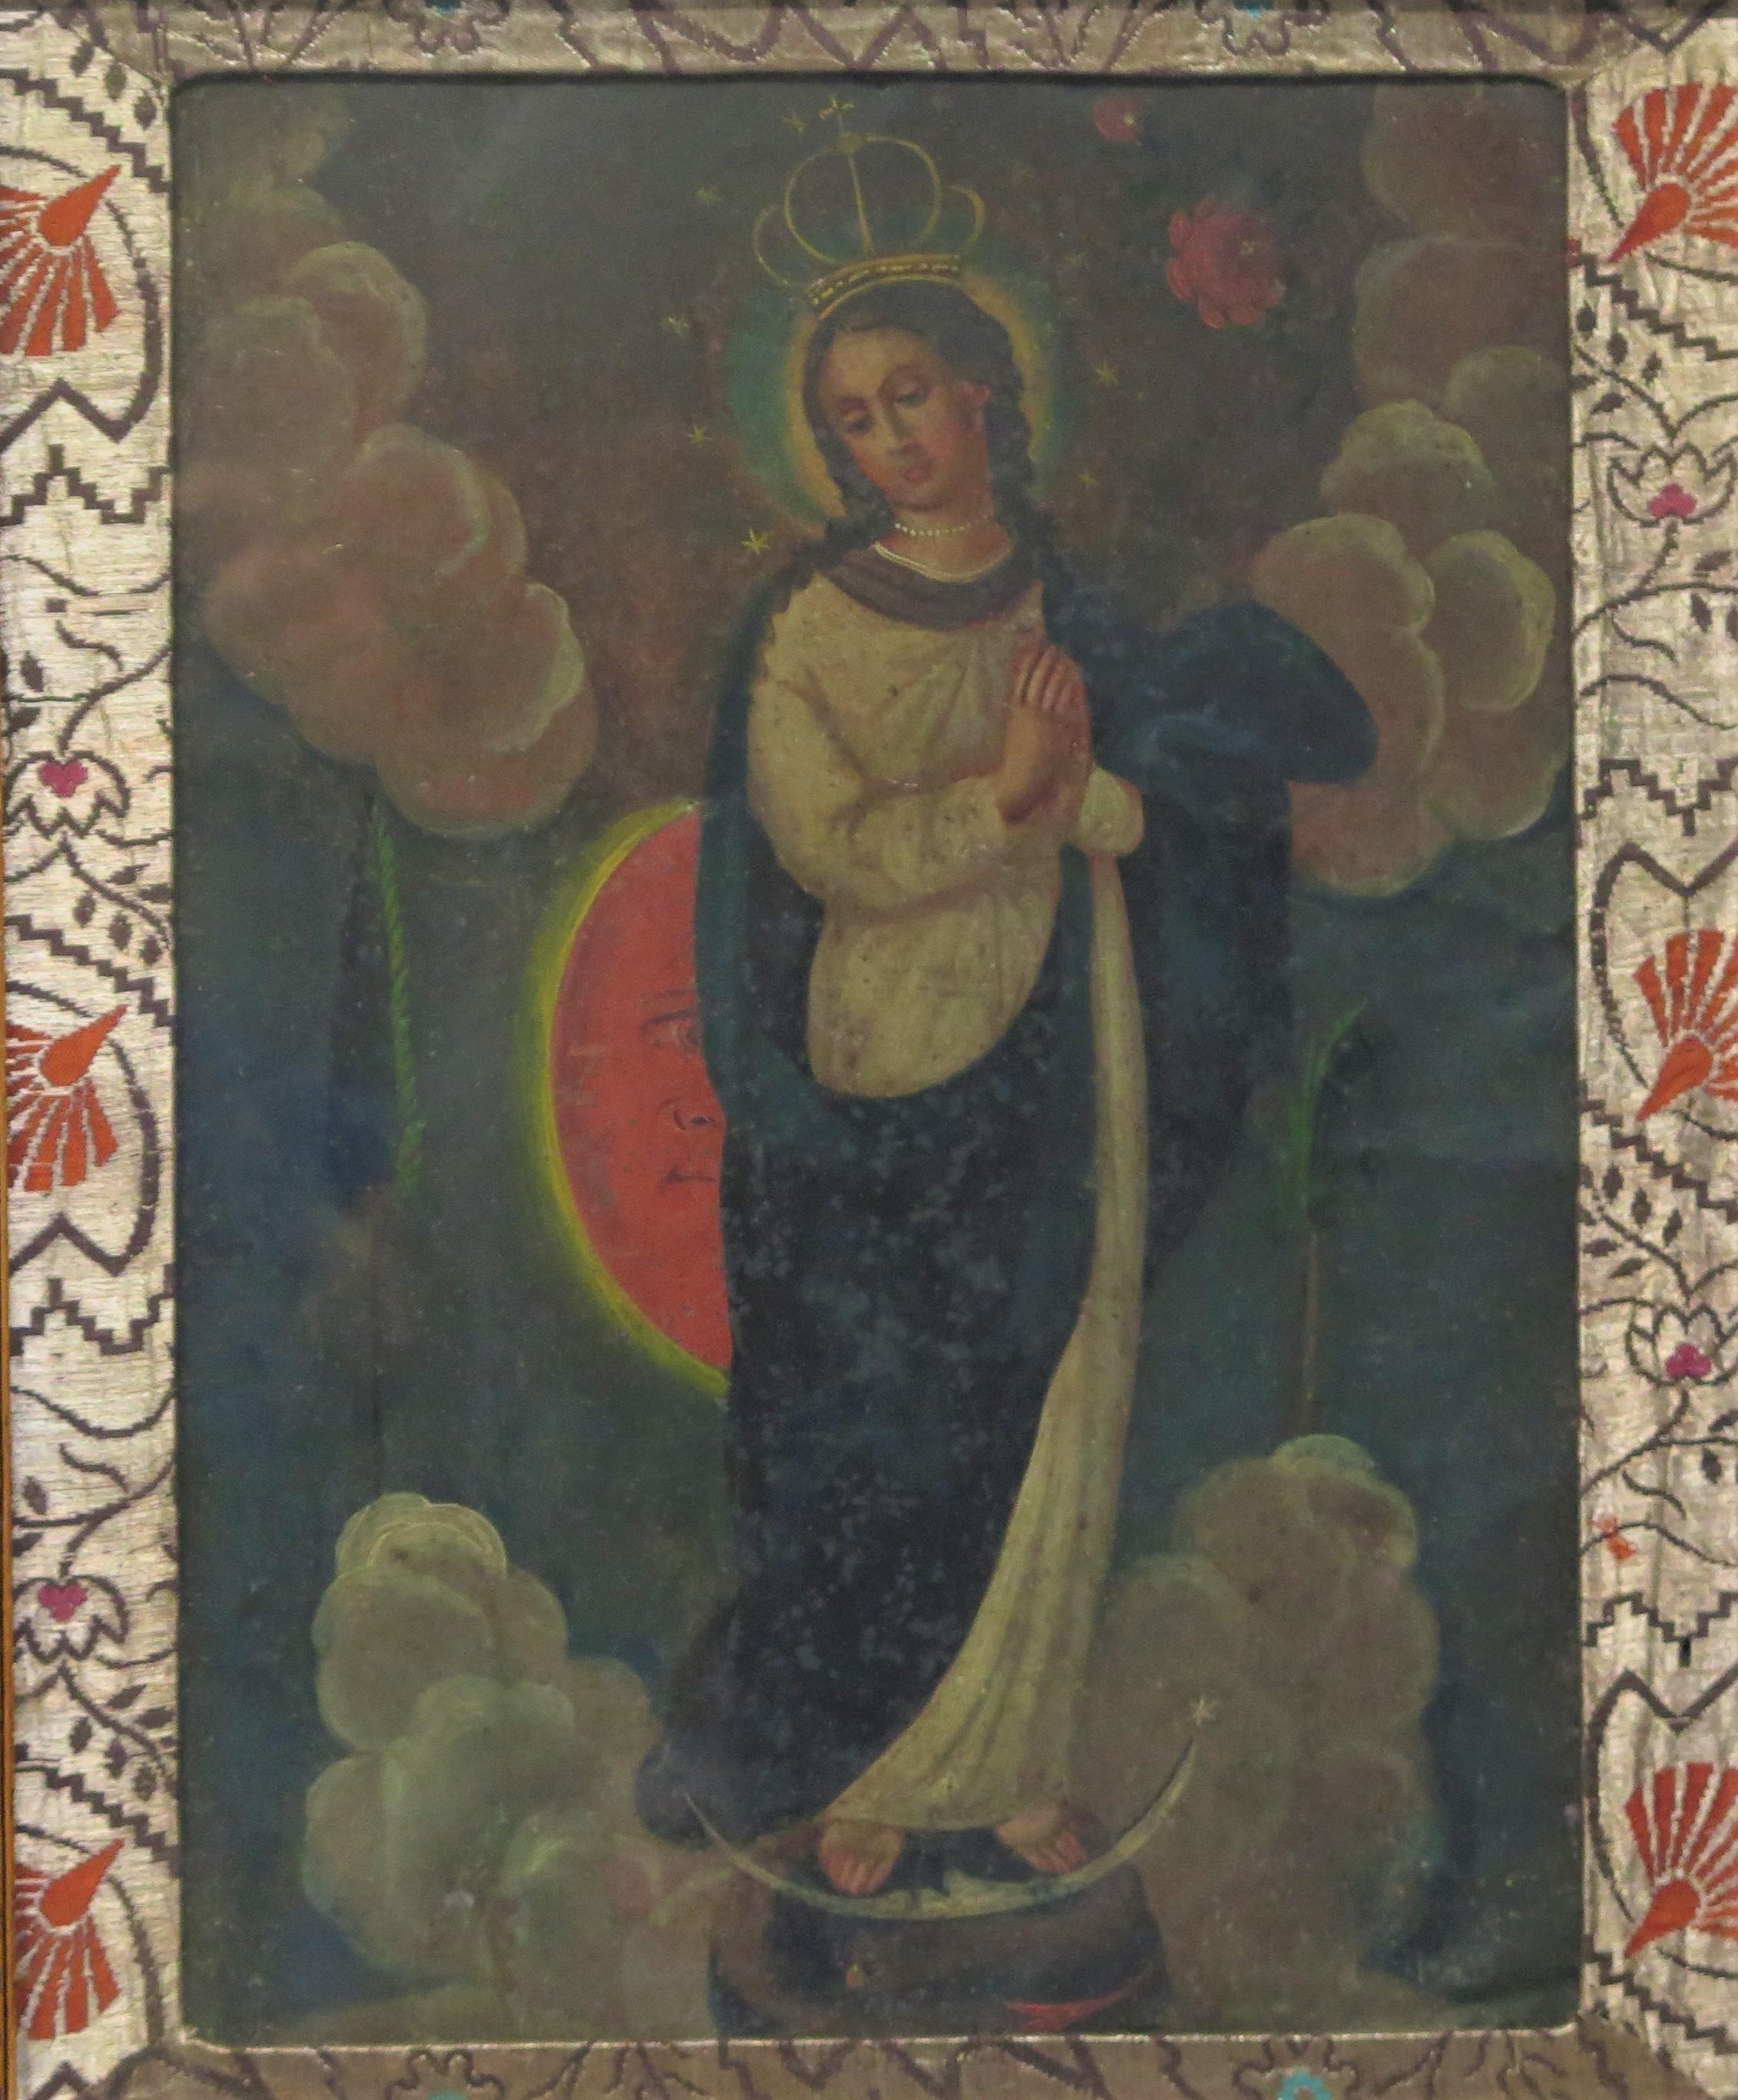 La Purisima Concepcion (The Immaculate Conception), circa 19th Century frame oil on tin Retablo, Mexico, The virgin Mary in blue mantle over a white gown, standing on a globe with crescent moon, a serpent beneath her feet, the sun is appearing from